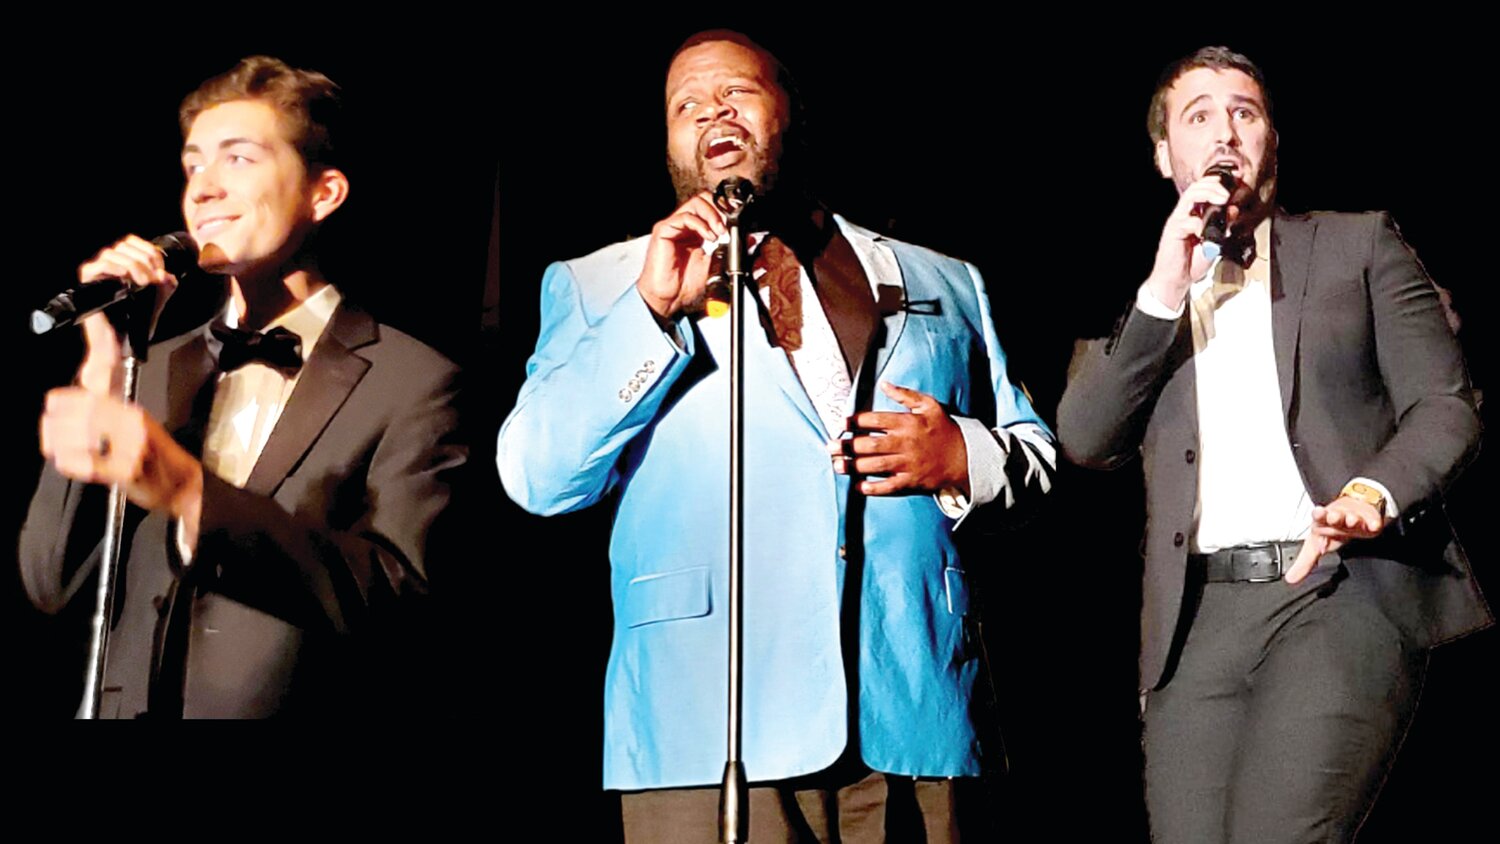 “The Crooners: From Nat King Cole to Michael Bublé” will perform music from some of the greatest “crooners” of the past 50 years.